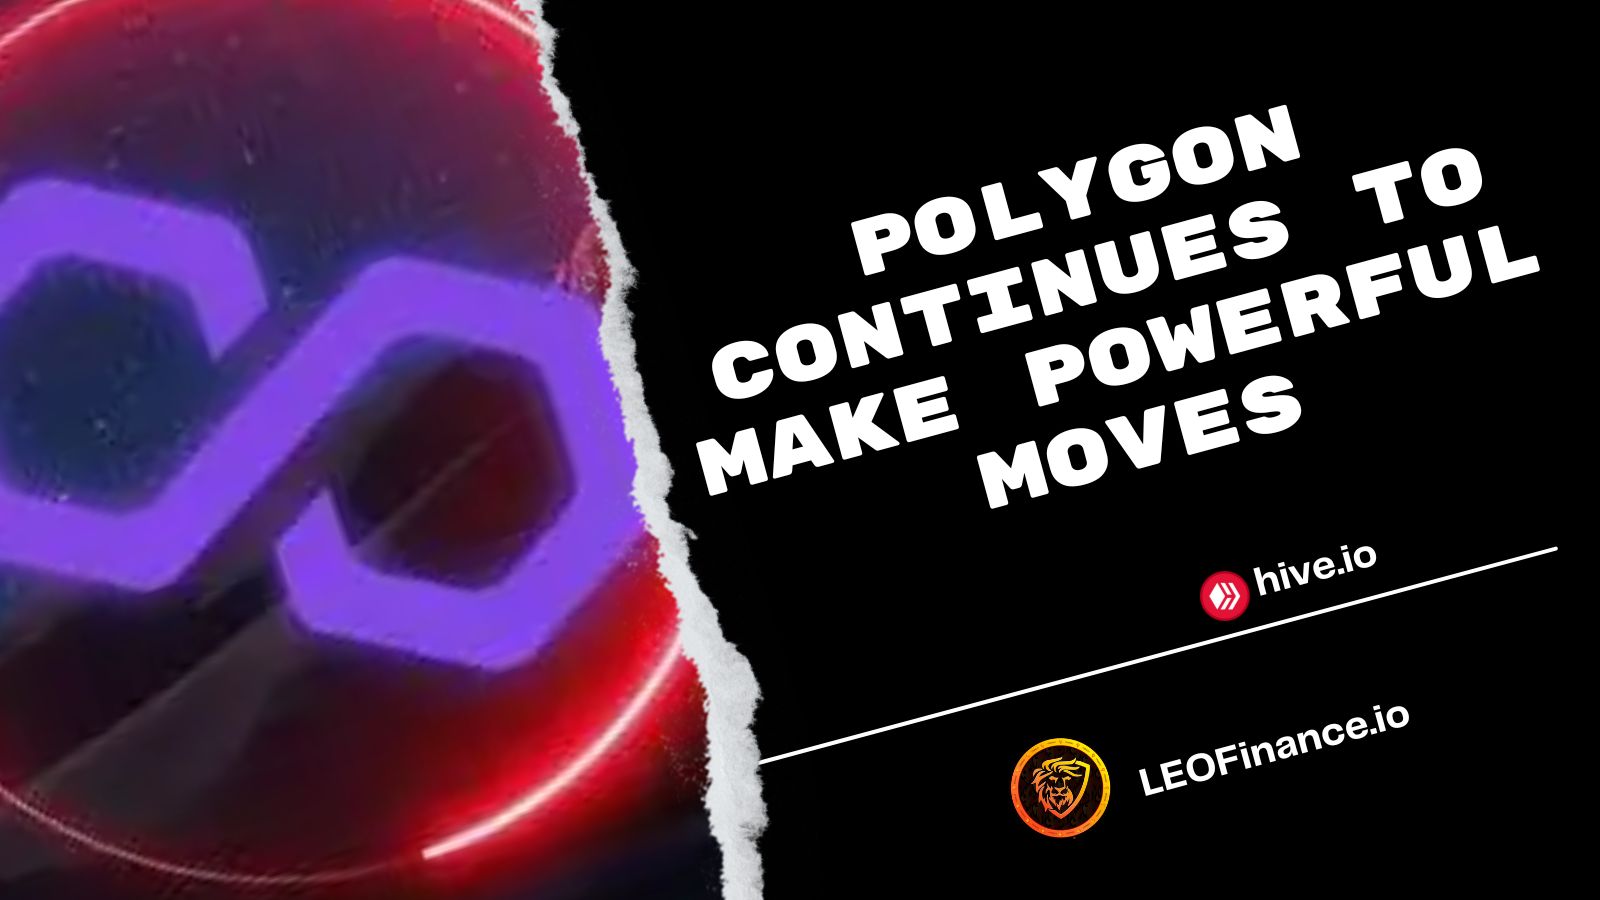 @bitcoinflood/polygon-continues-to-make-powerful-moves